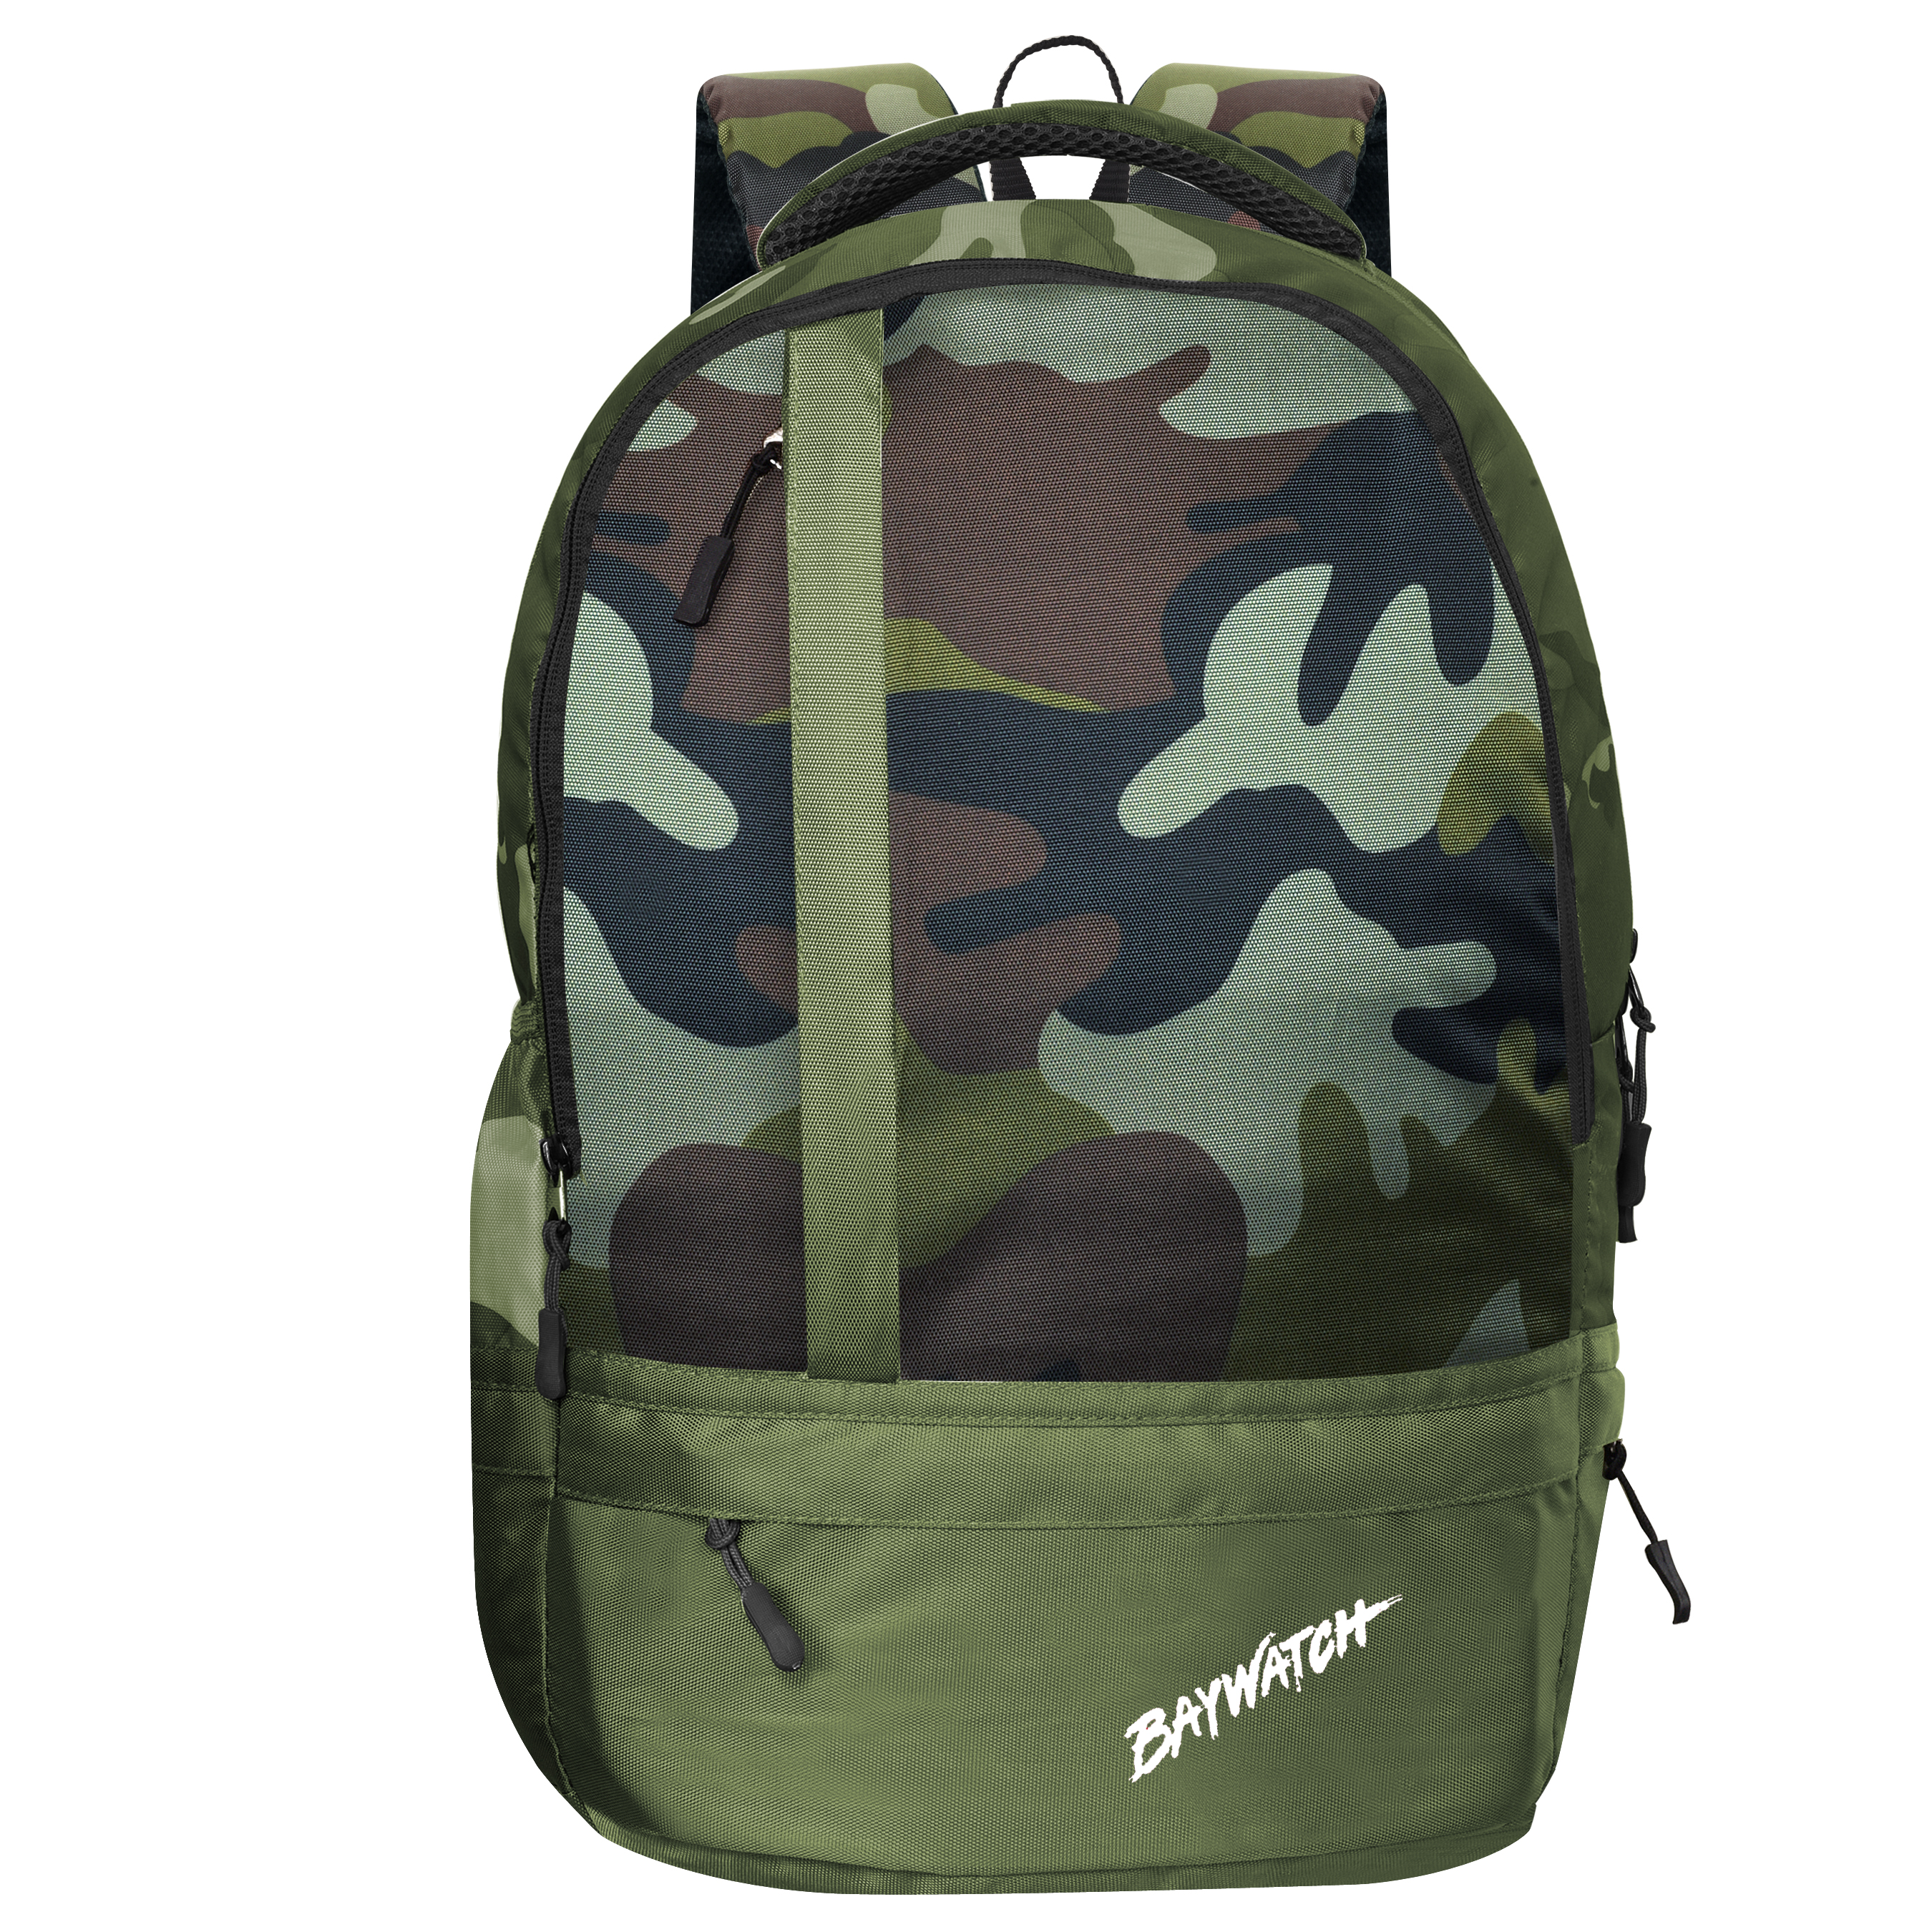 Baywatch 25 Litre Army Printed Unisex Polyester Casual Laptop Backpack  Green 